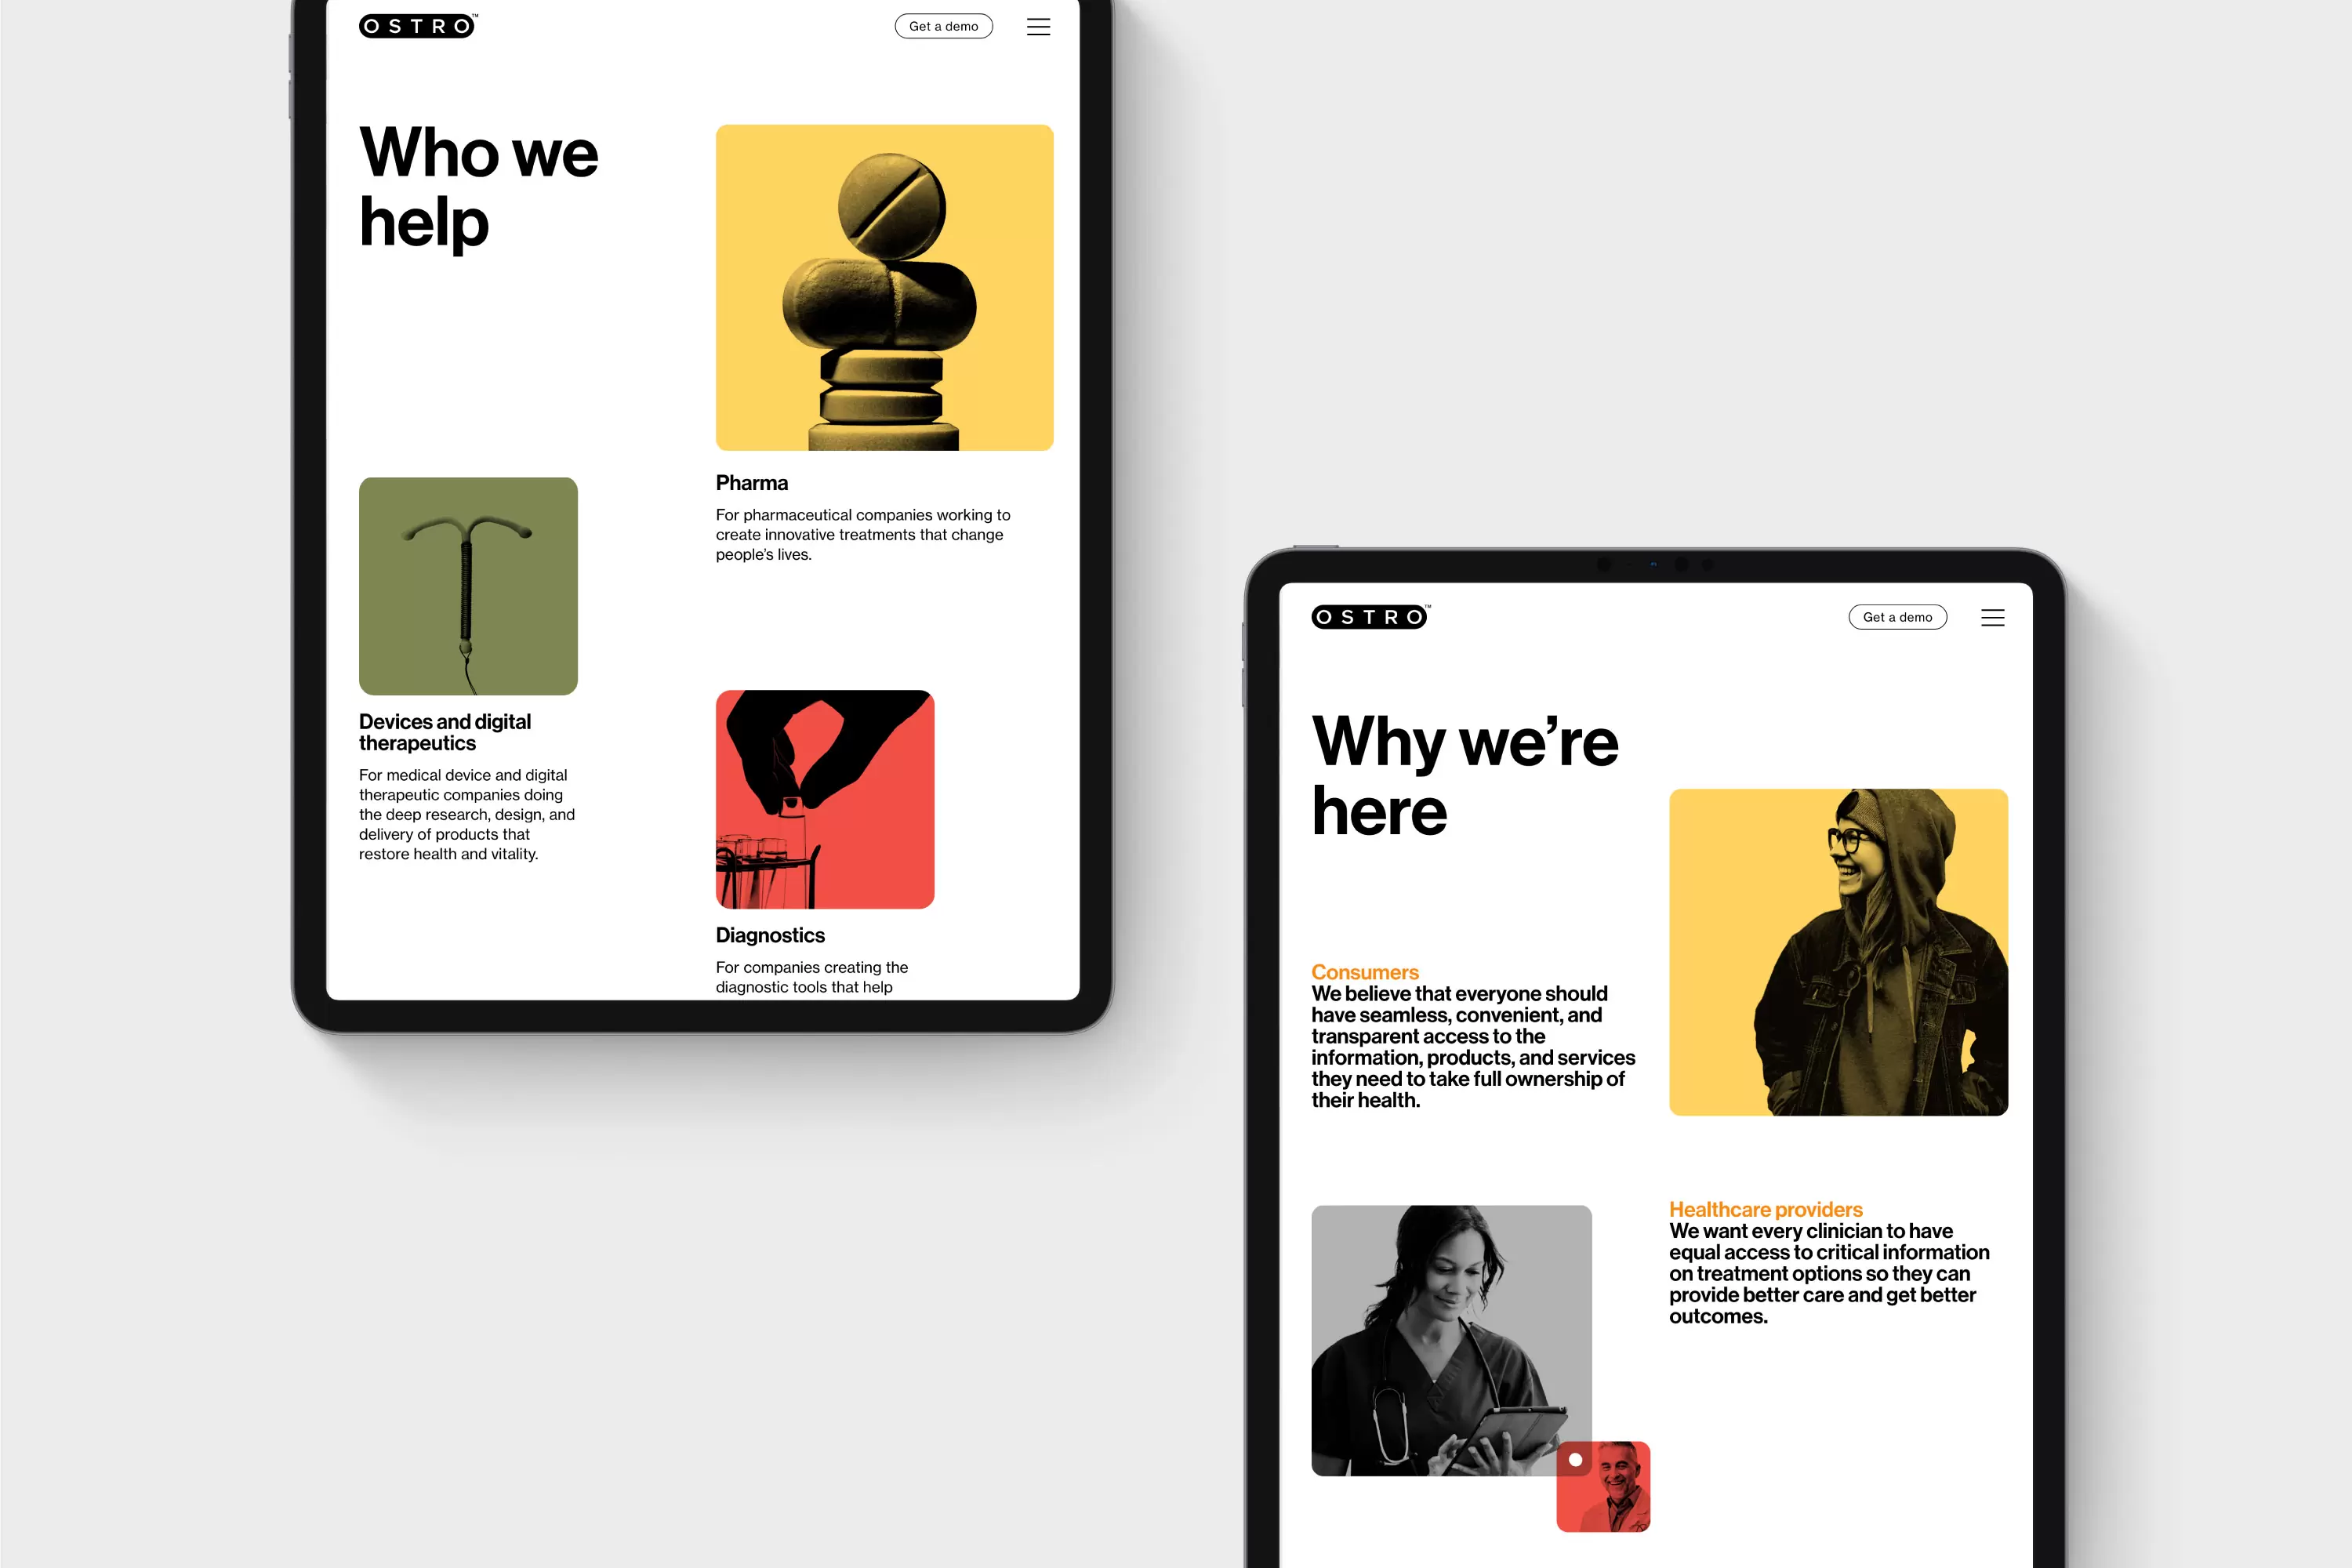 New brand identity and website designed by Mucho for American life science software company Ostro.